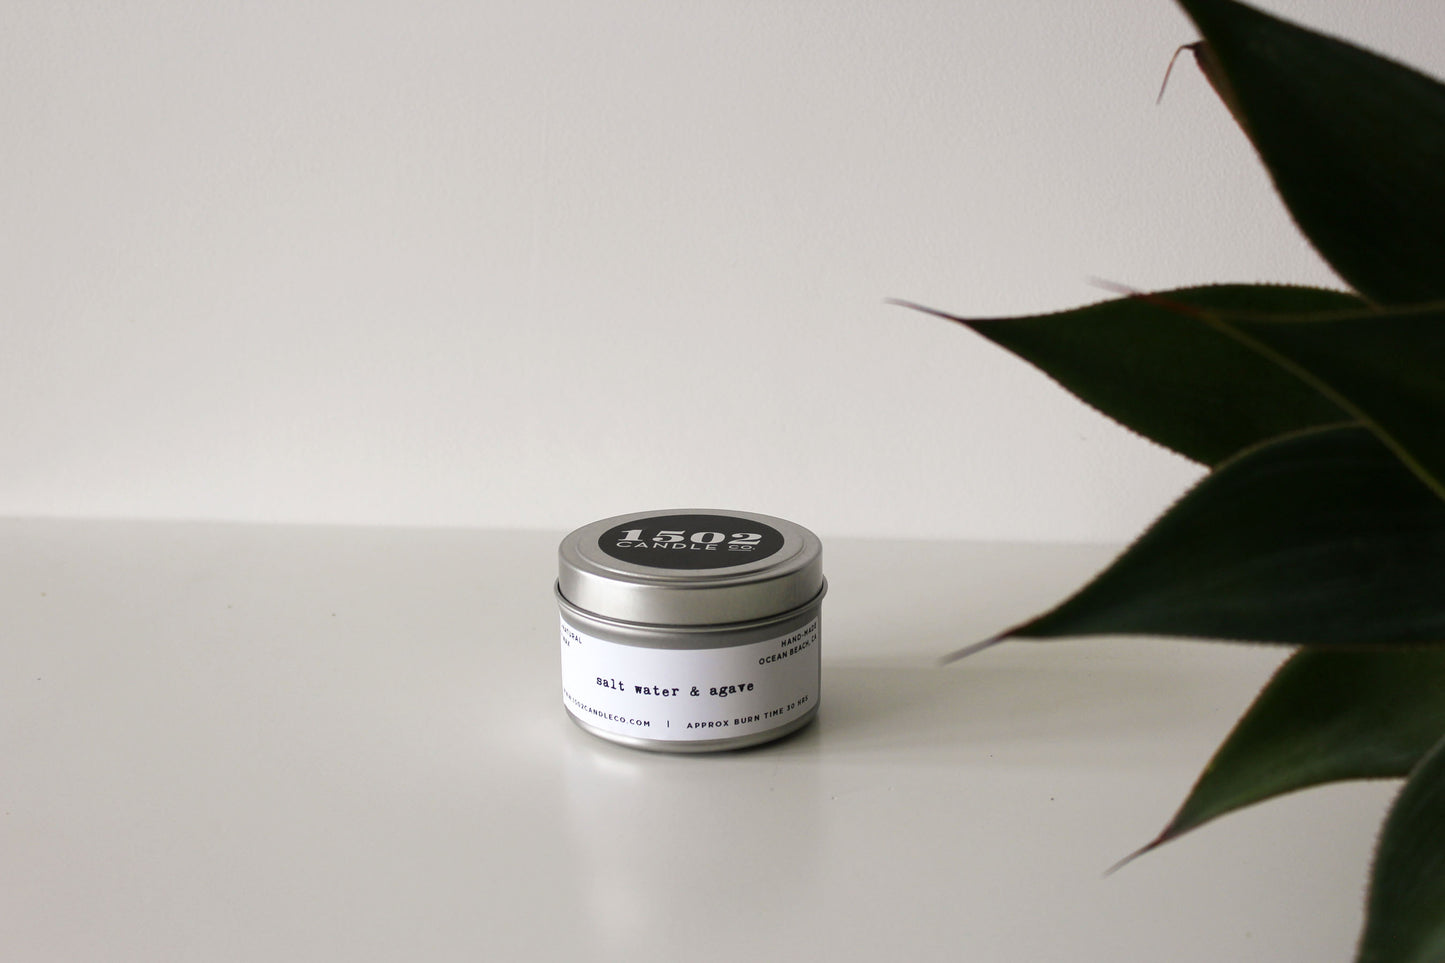 1502 Candle Co. | Salt Water & Agave Candle - Travel Tin